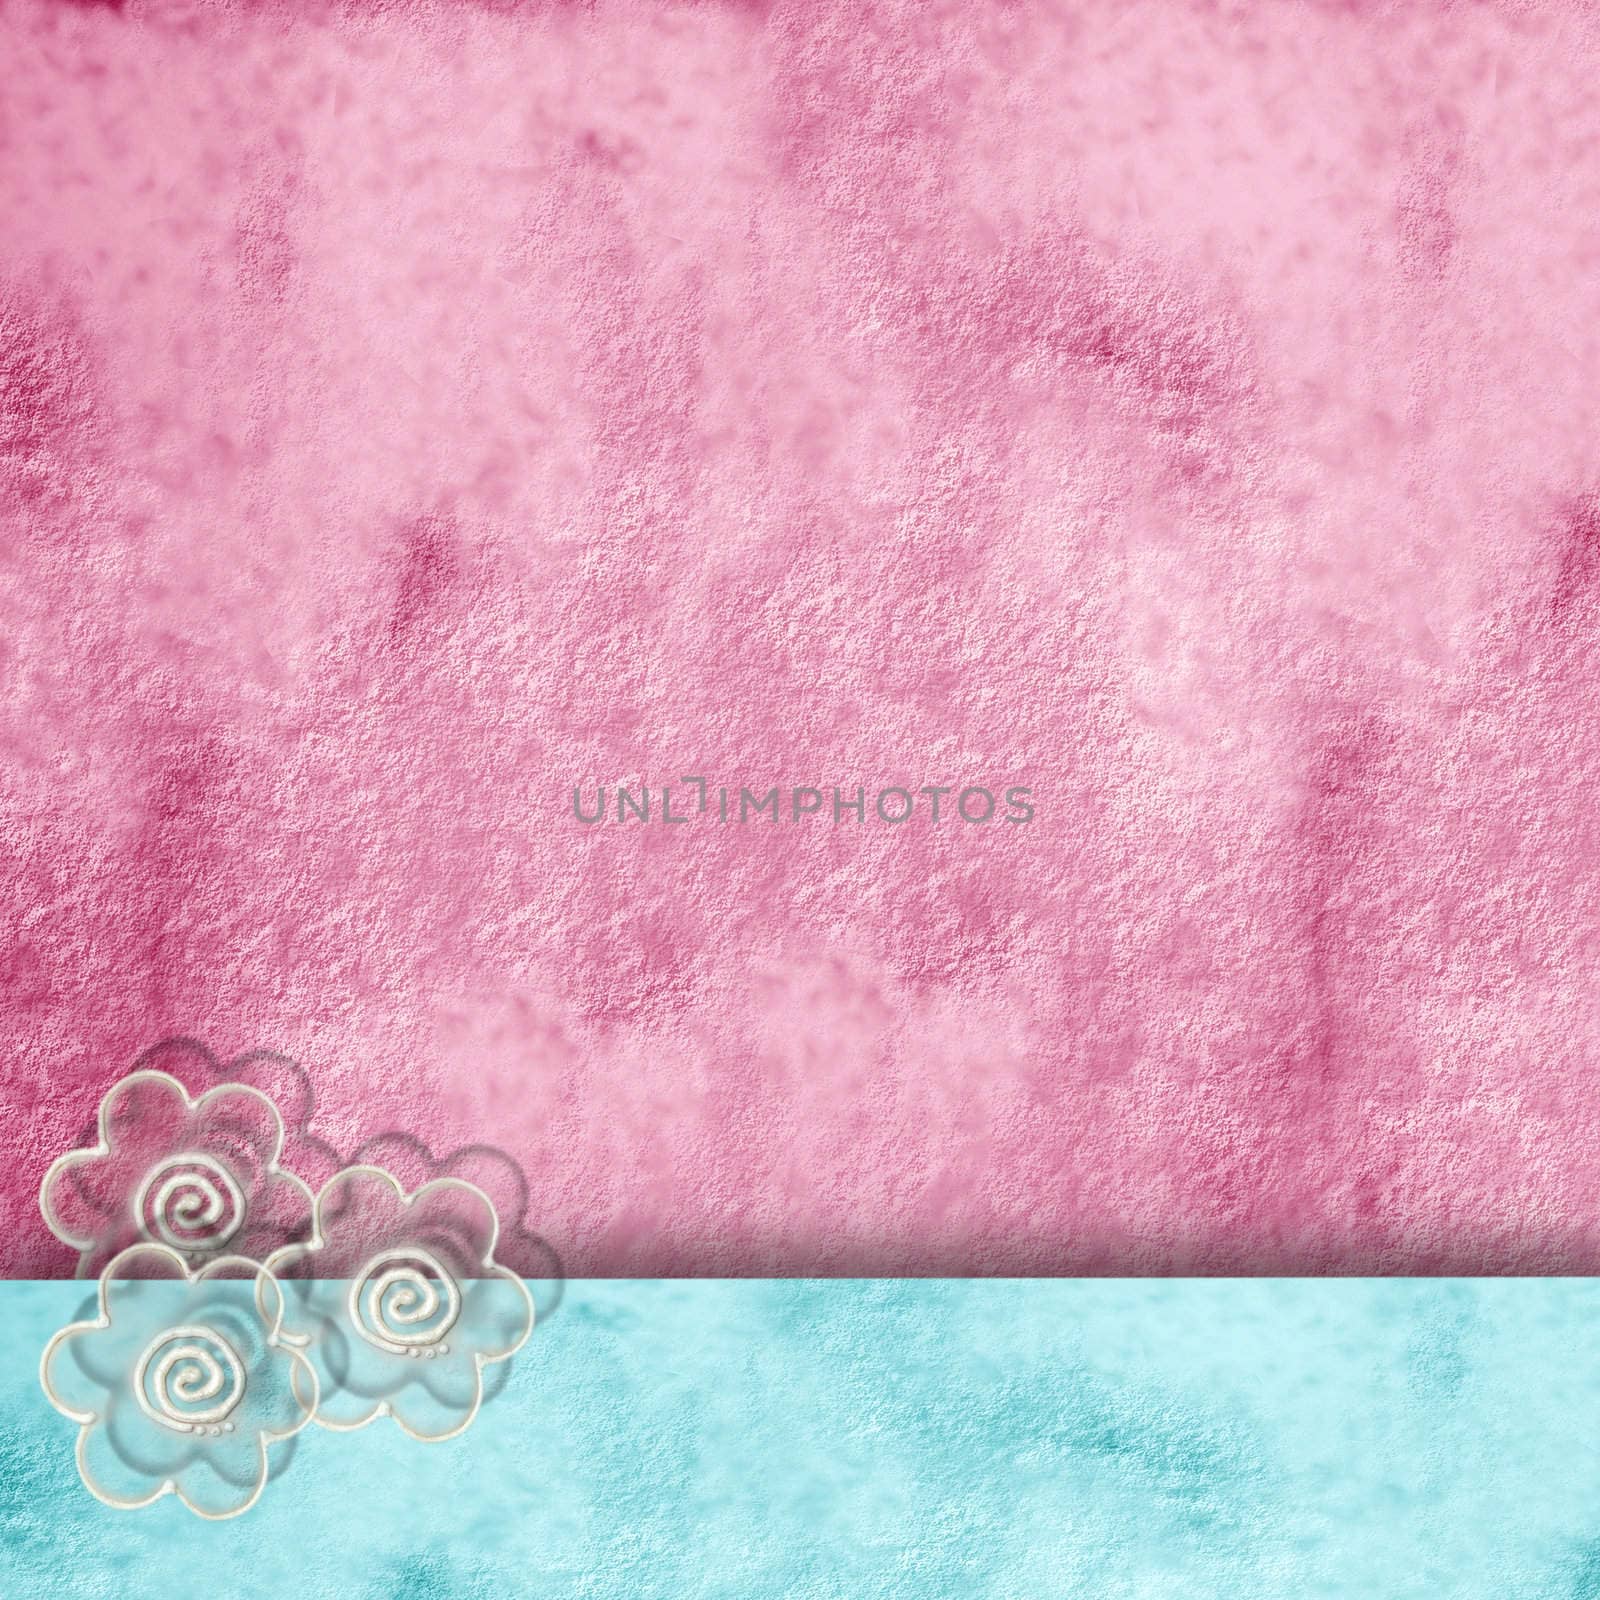 rough background pink and blue, with bright flowers